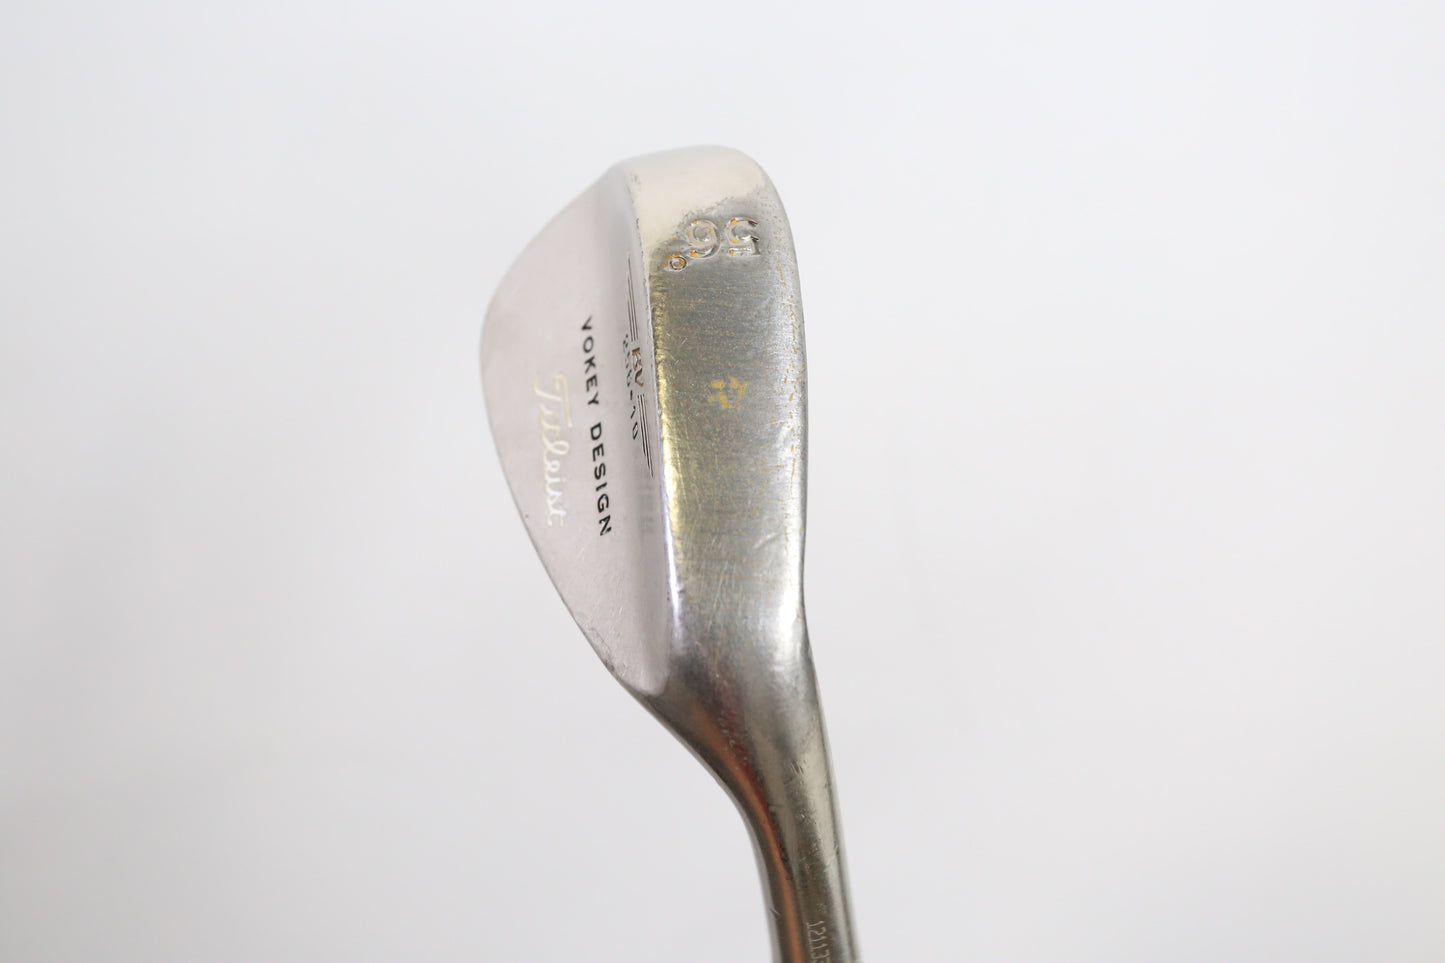 Used Titleist Vokey 200 Tour Tumbled Sand Wedge - Right-Handed - 56 Degrees - Stiff Flex